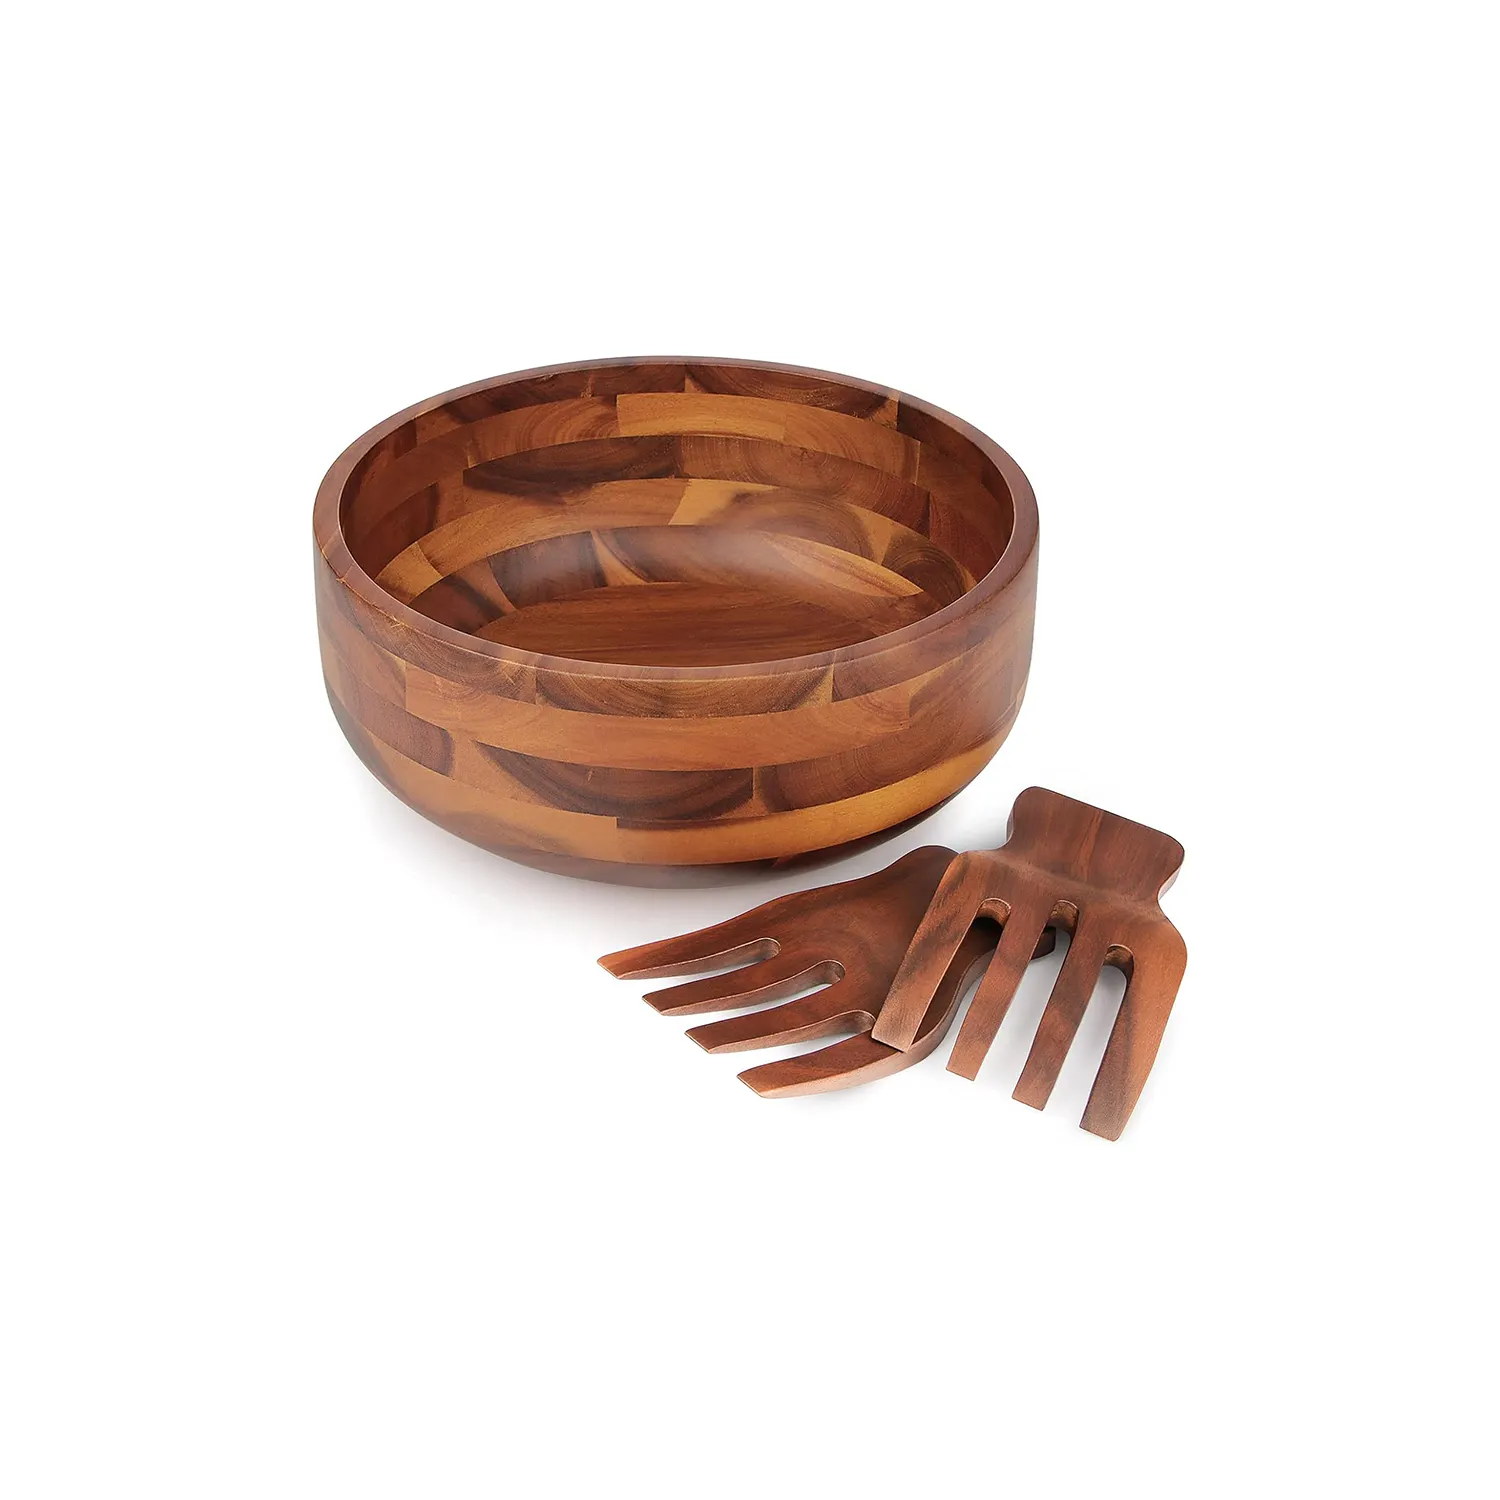 Acacia Wood Salad Bowl Set with 2 Wooden Hands Large Salad Bowl with Serving Utensils